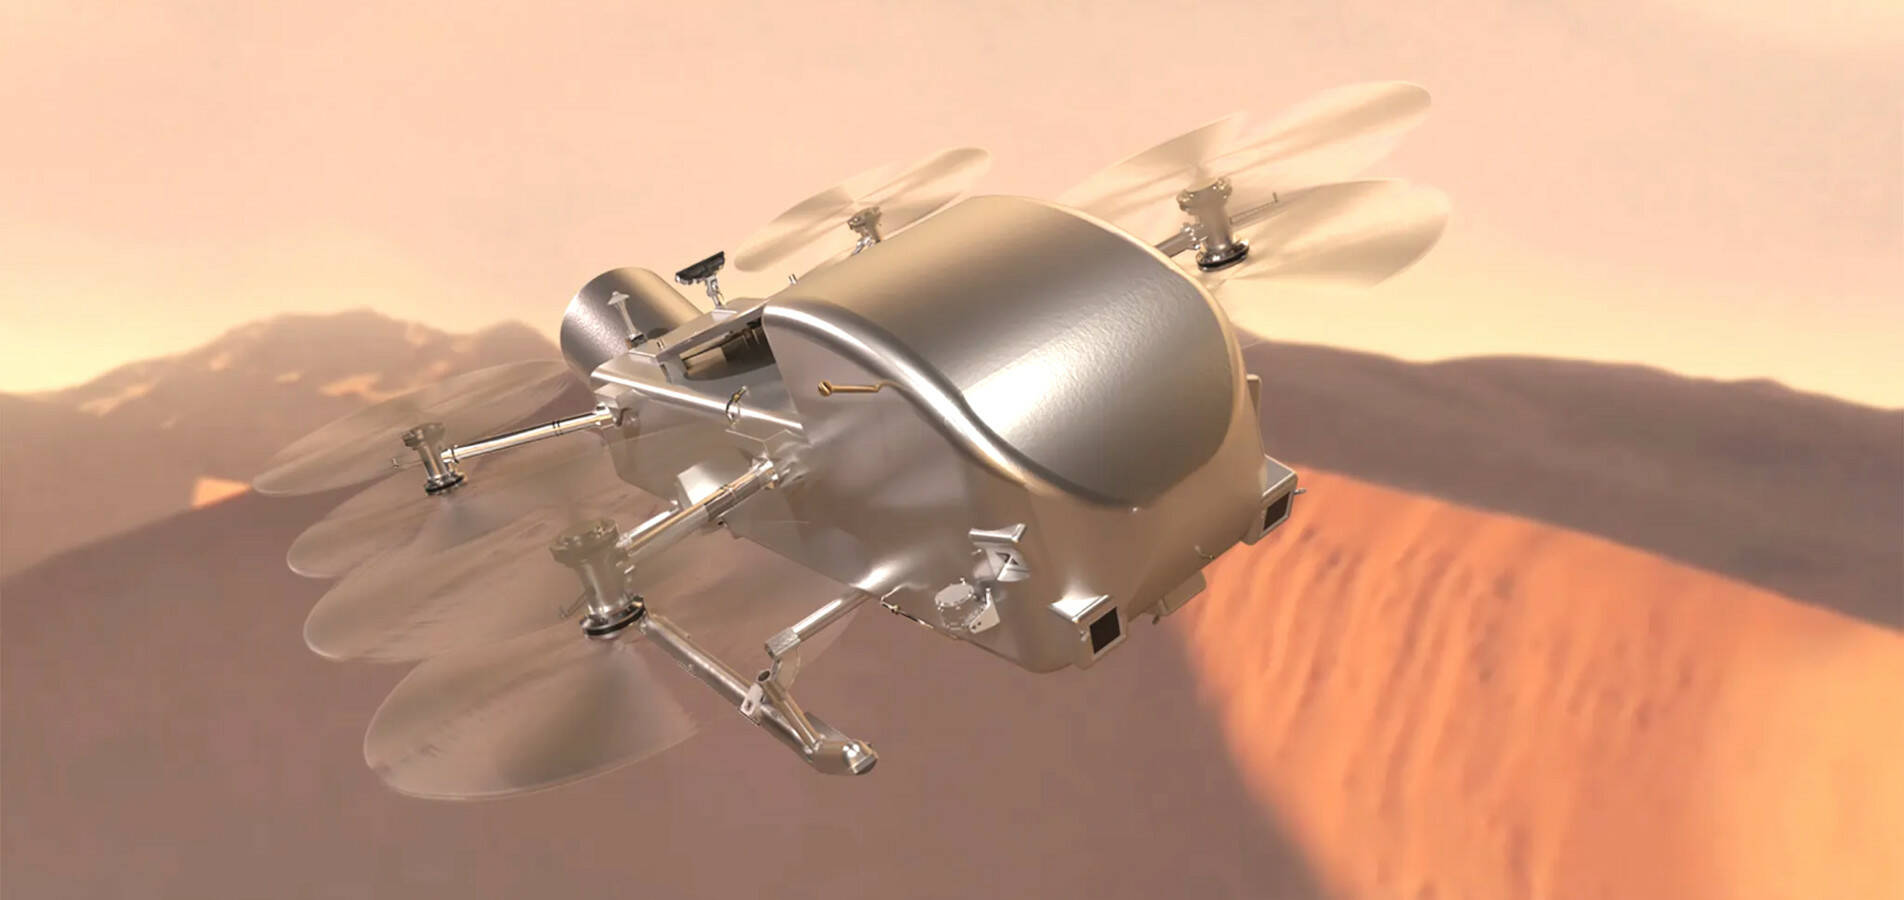 NASA has finally confirmed its Dragonfly rotorcraft mission will be heading to Titan, one of Saturn's Moons, meaning the team behind the project can f